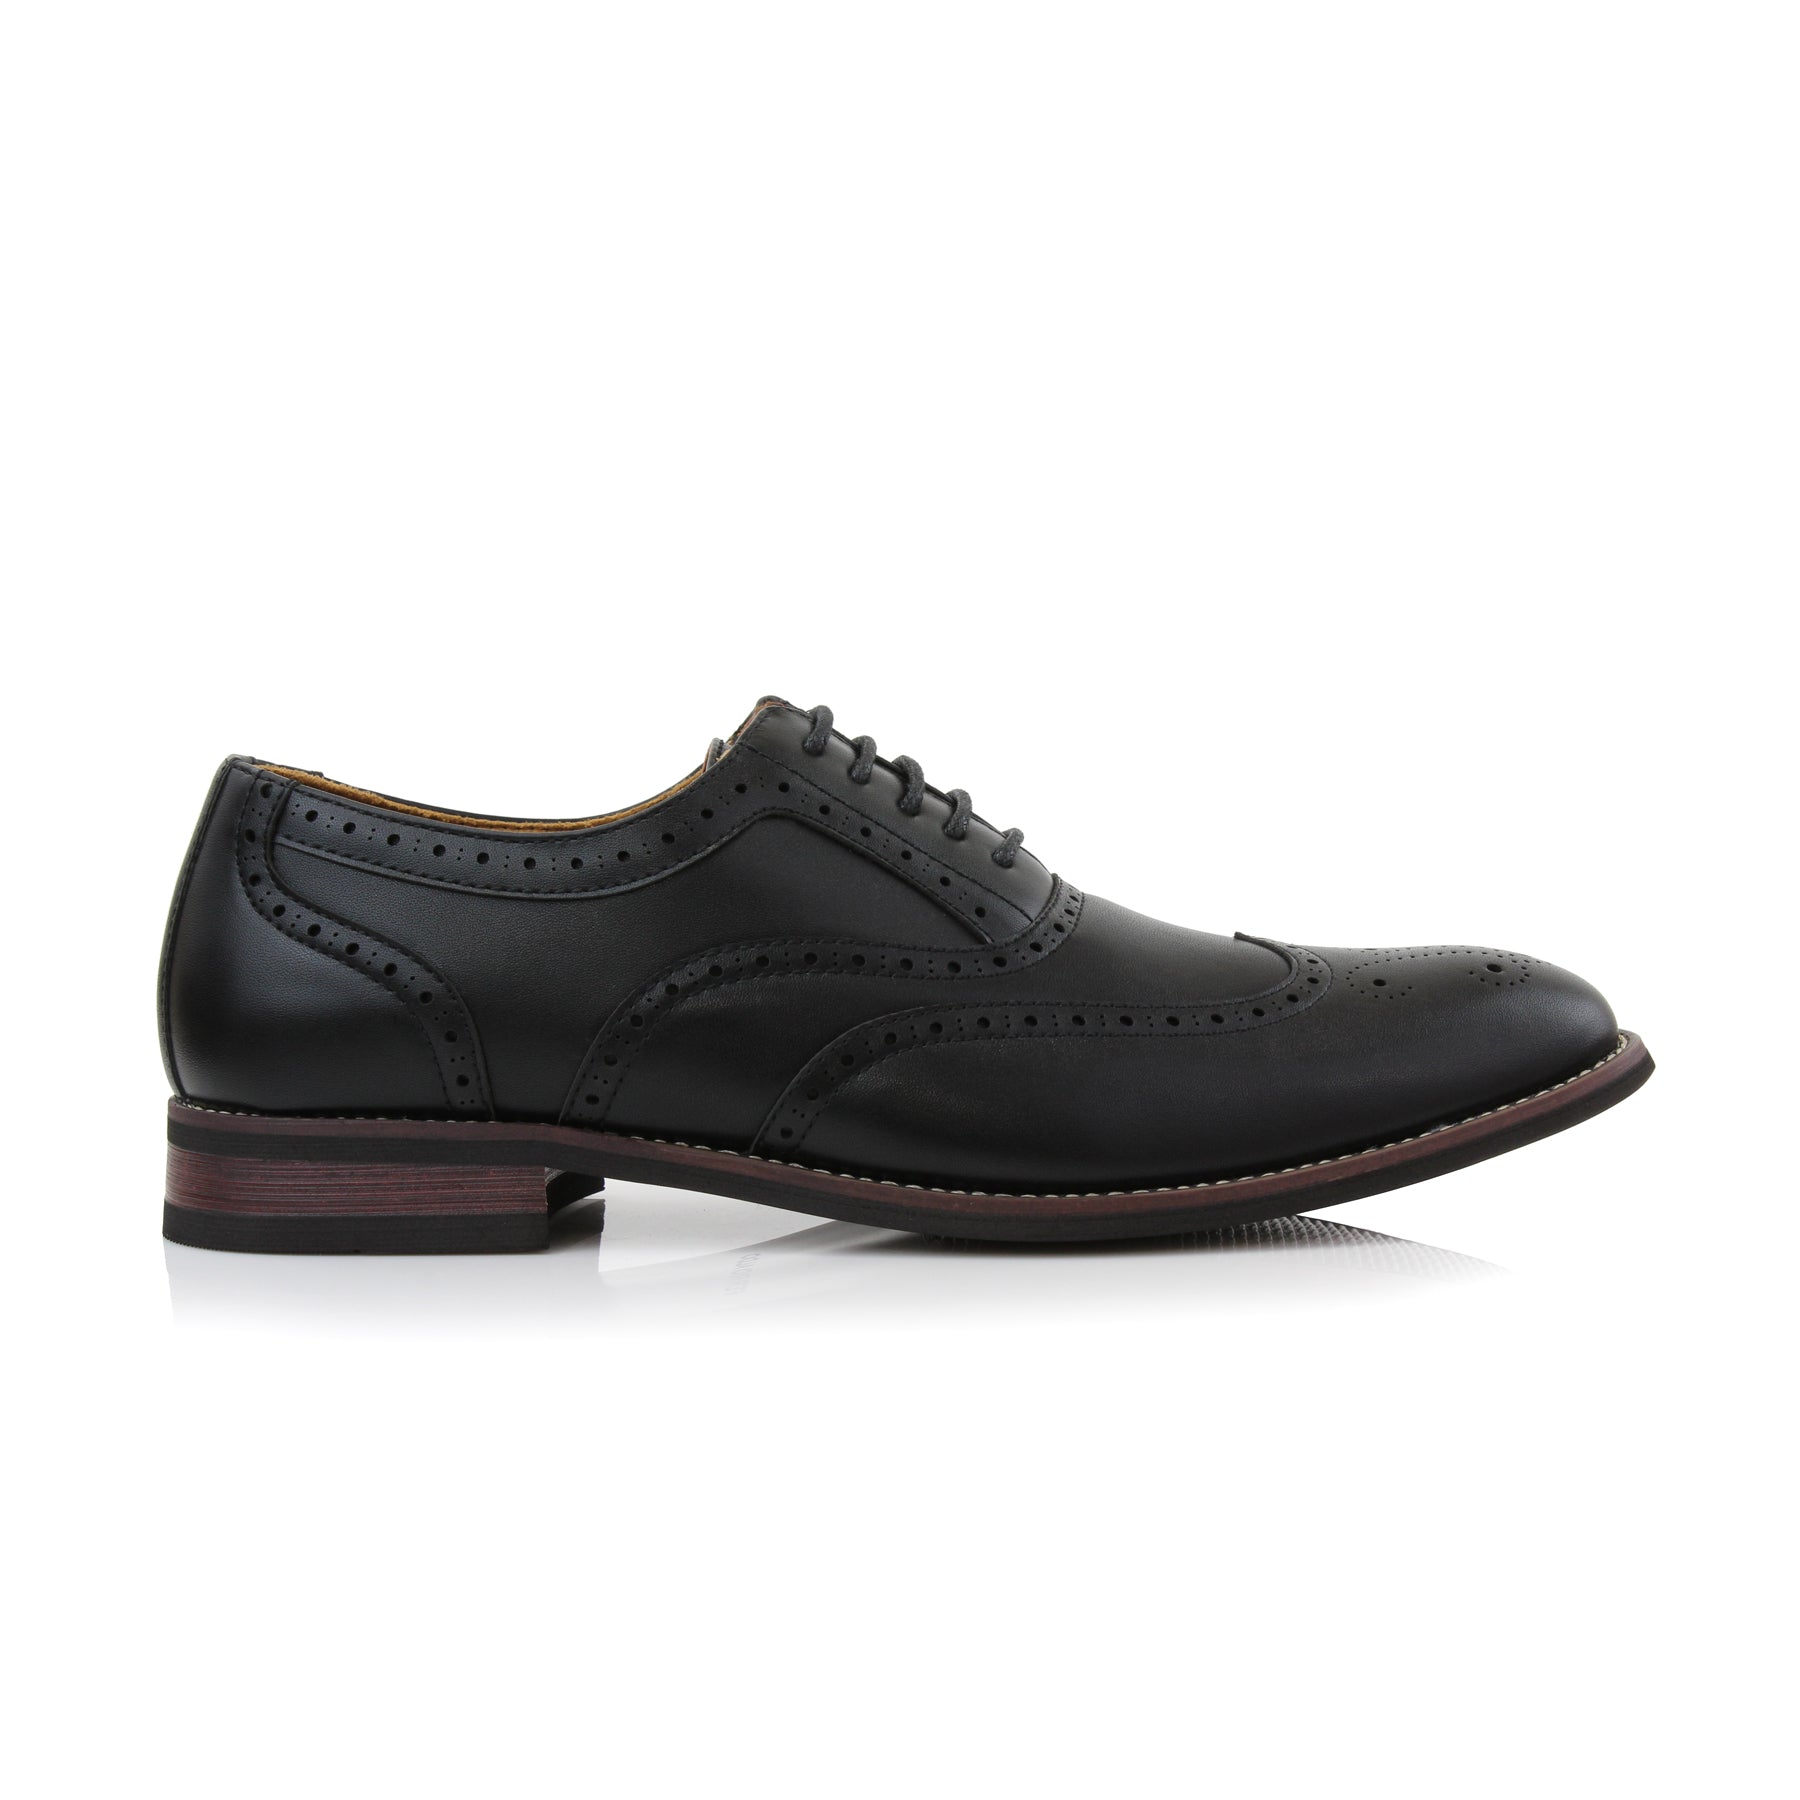 Brogue Wingtip Oxfords | Arthur by Ferro Aldo | Conal Footwear | Outer Side Angle View